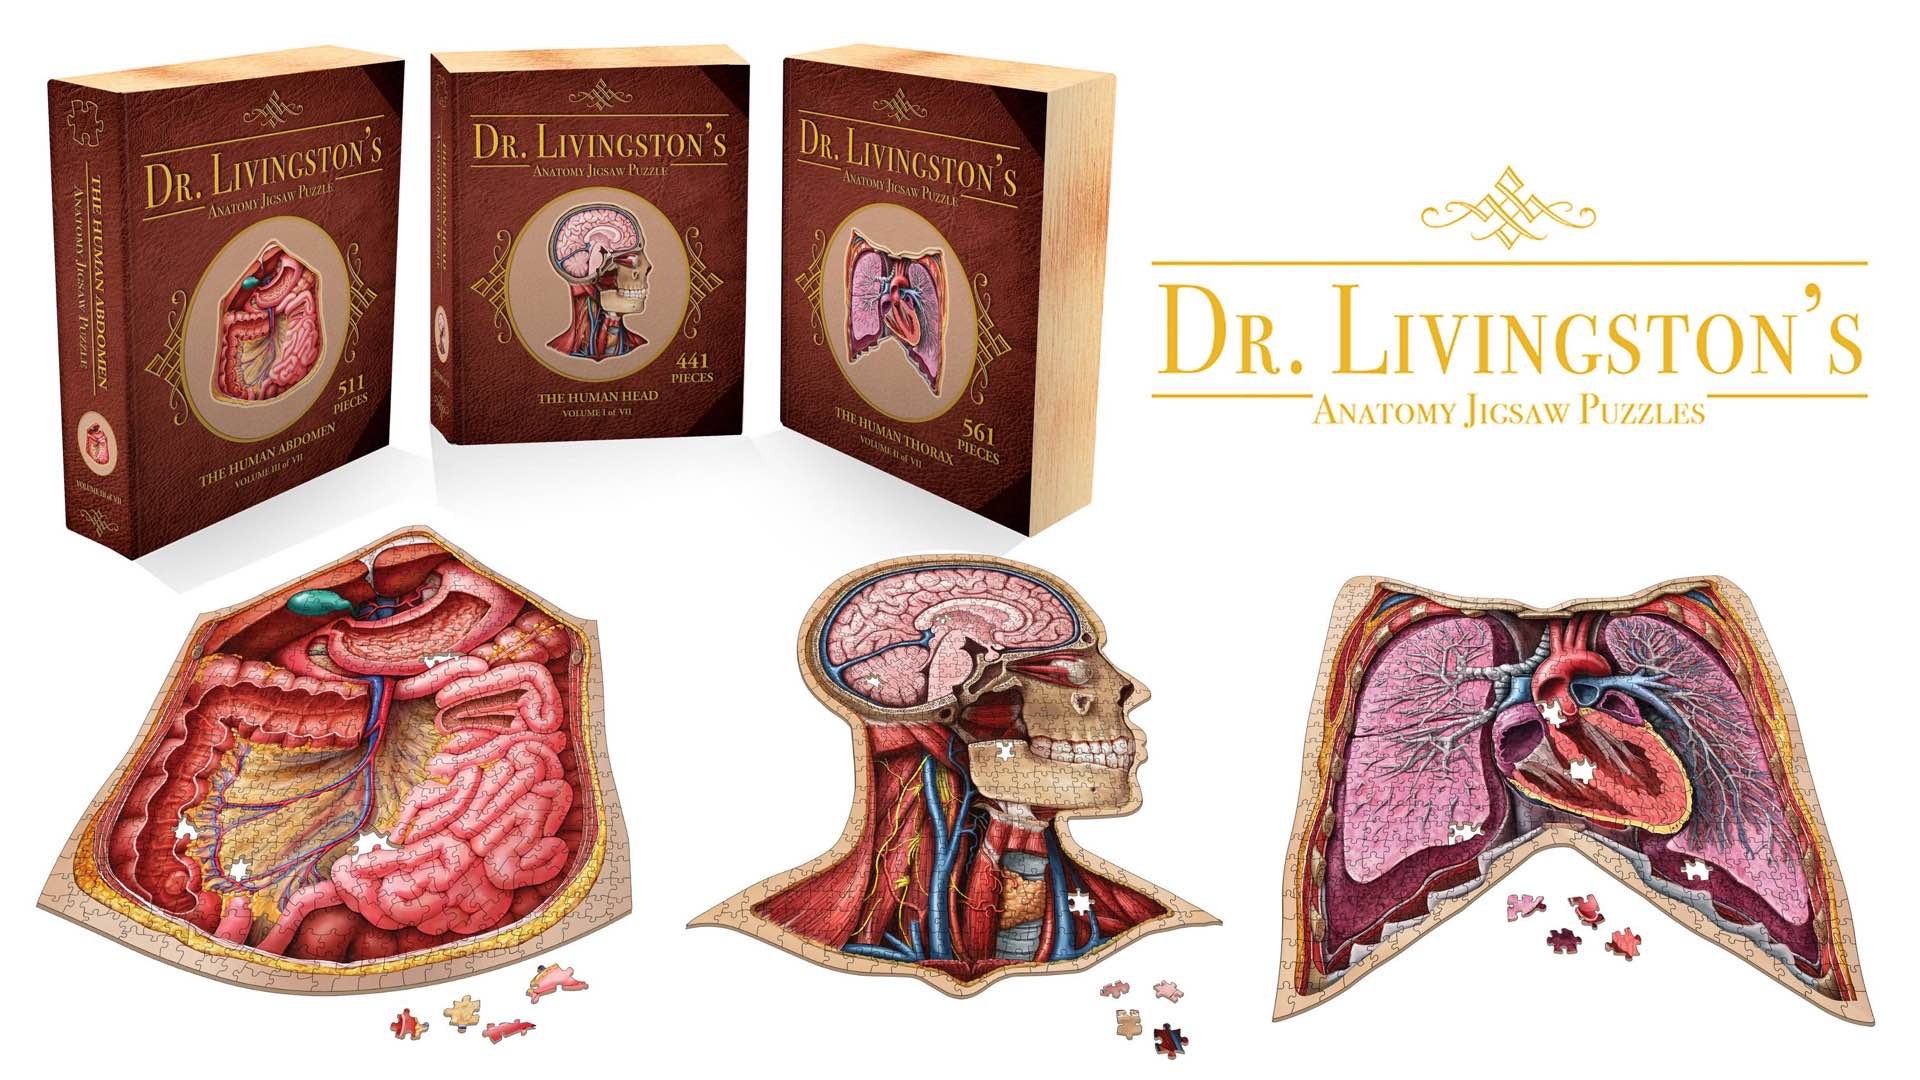 Dr. Livingston's human anatomy puzzles. ($20 a pop, or $140 for the 7-puzzle full body set)